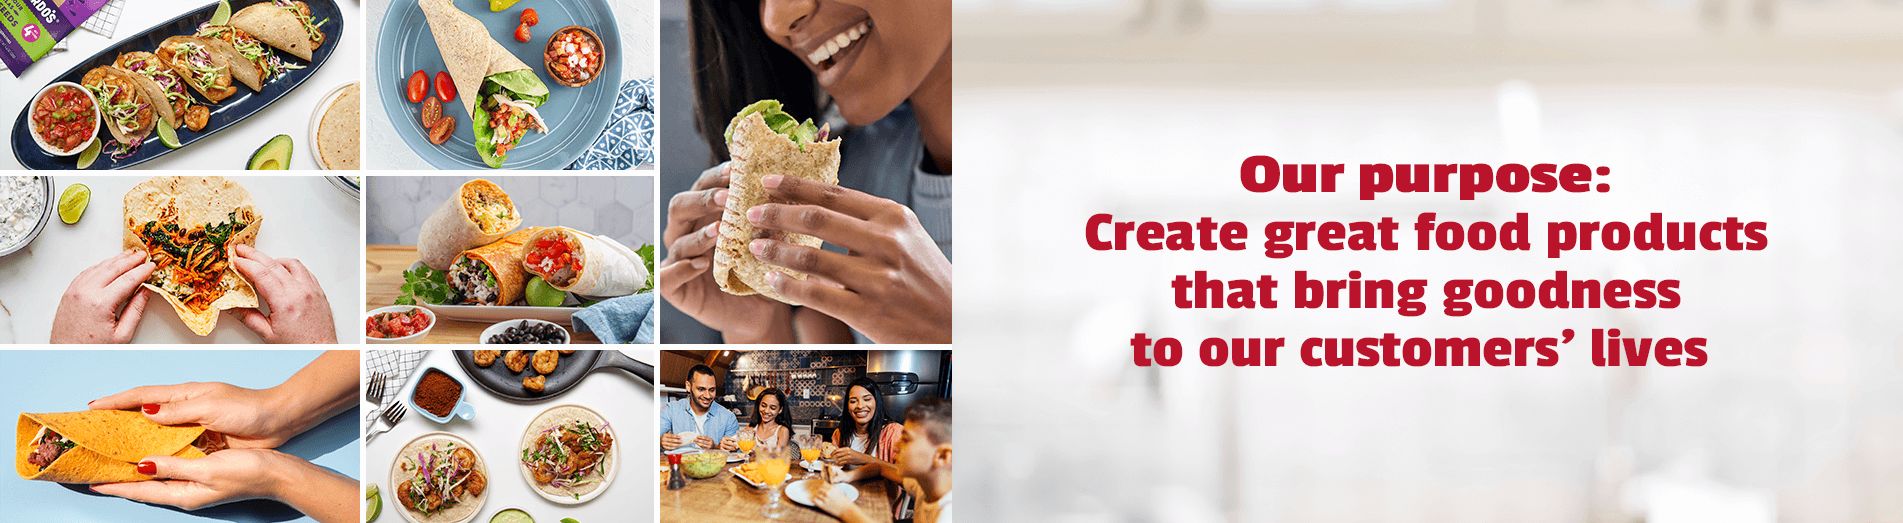 Create great food products that bring goodness to our customers' lives